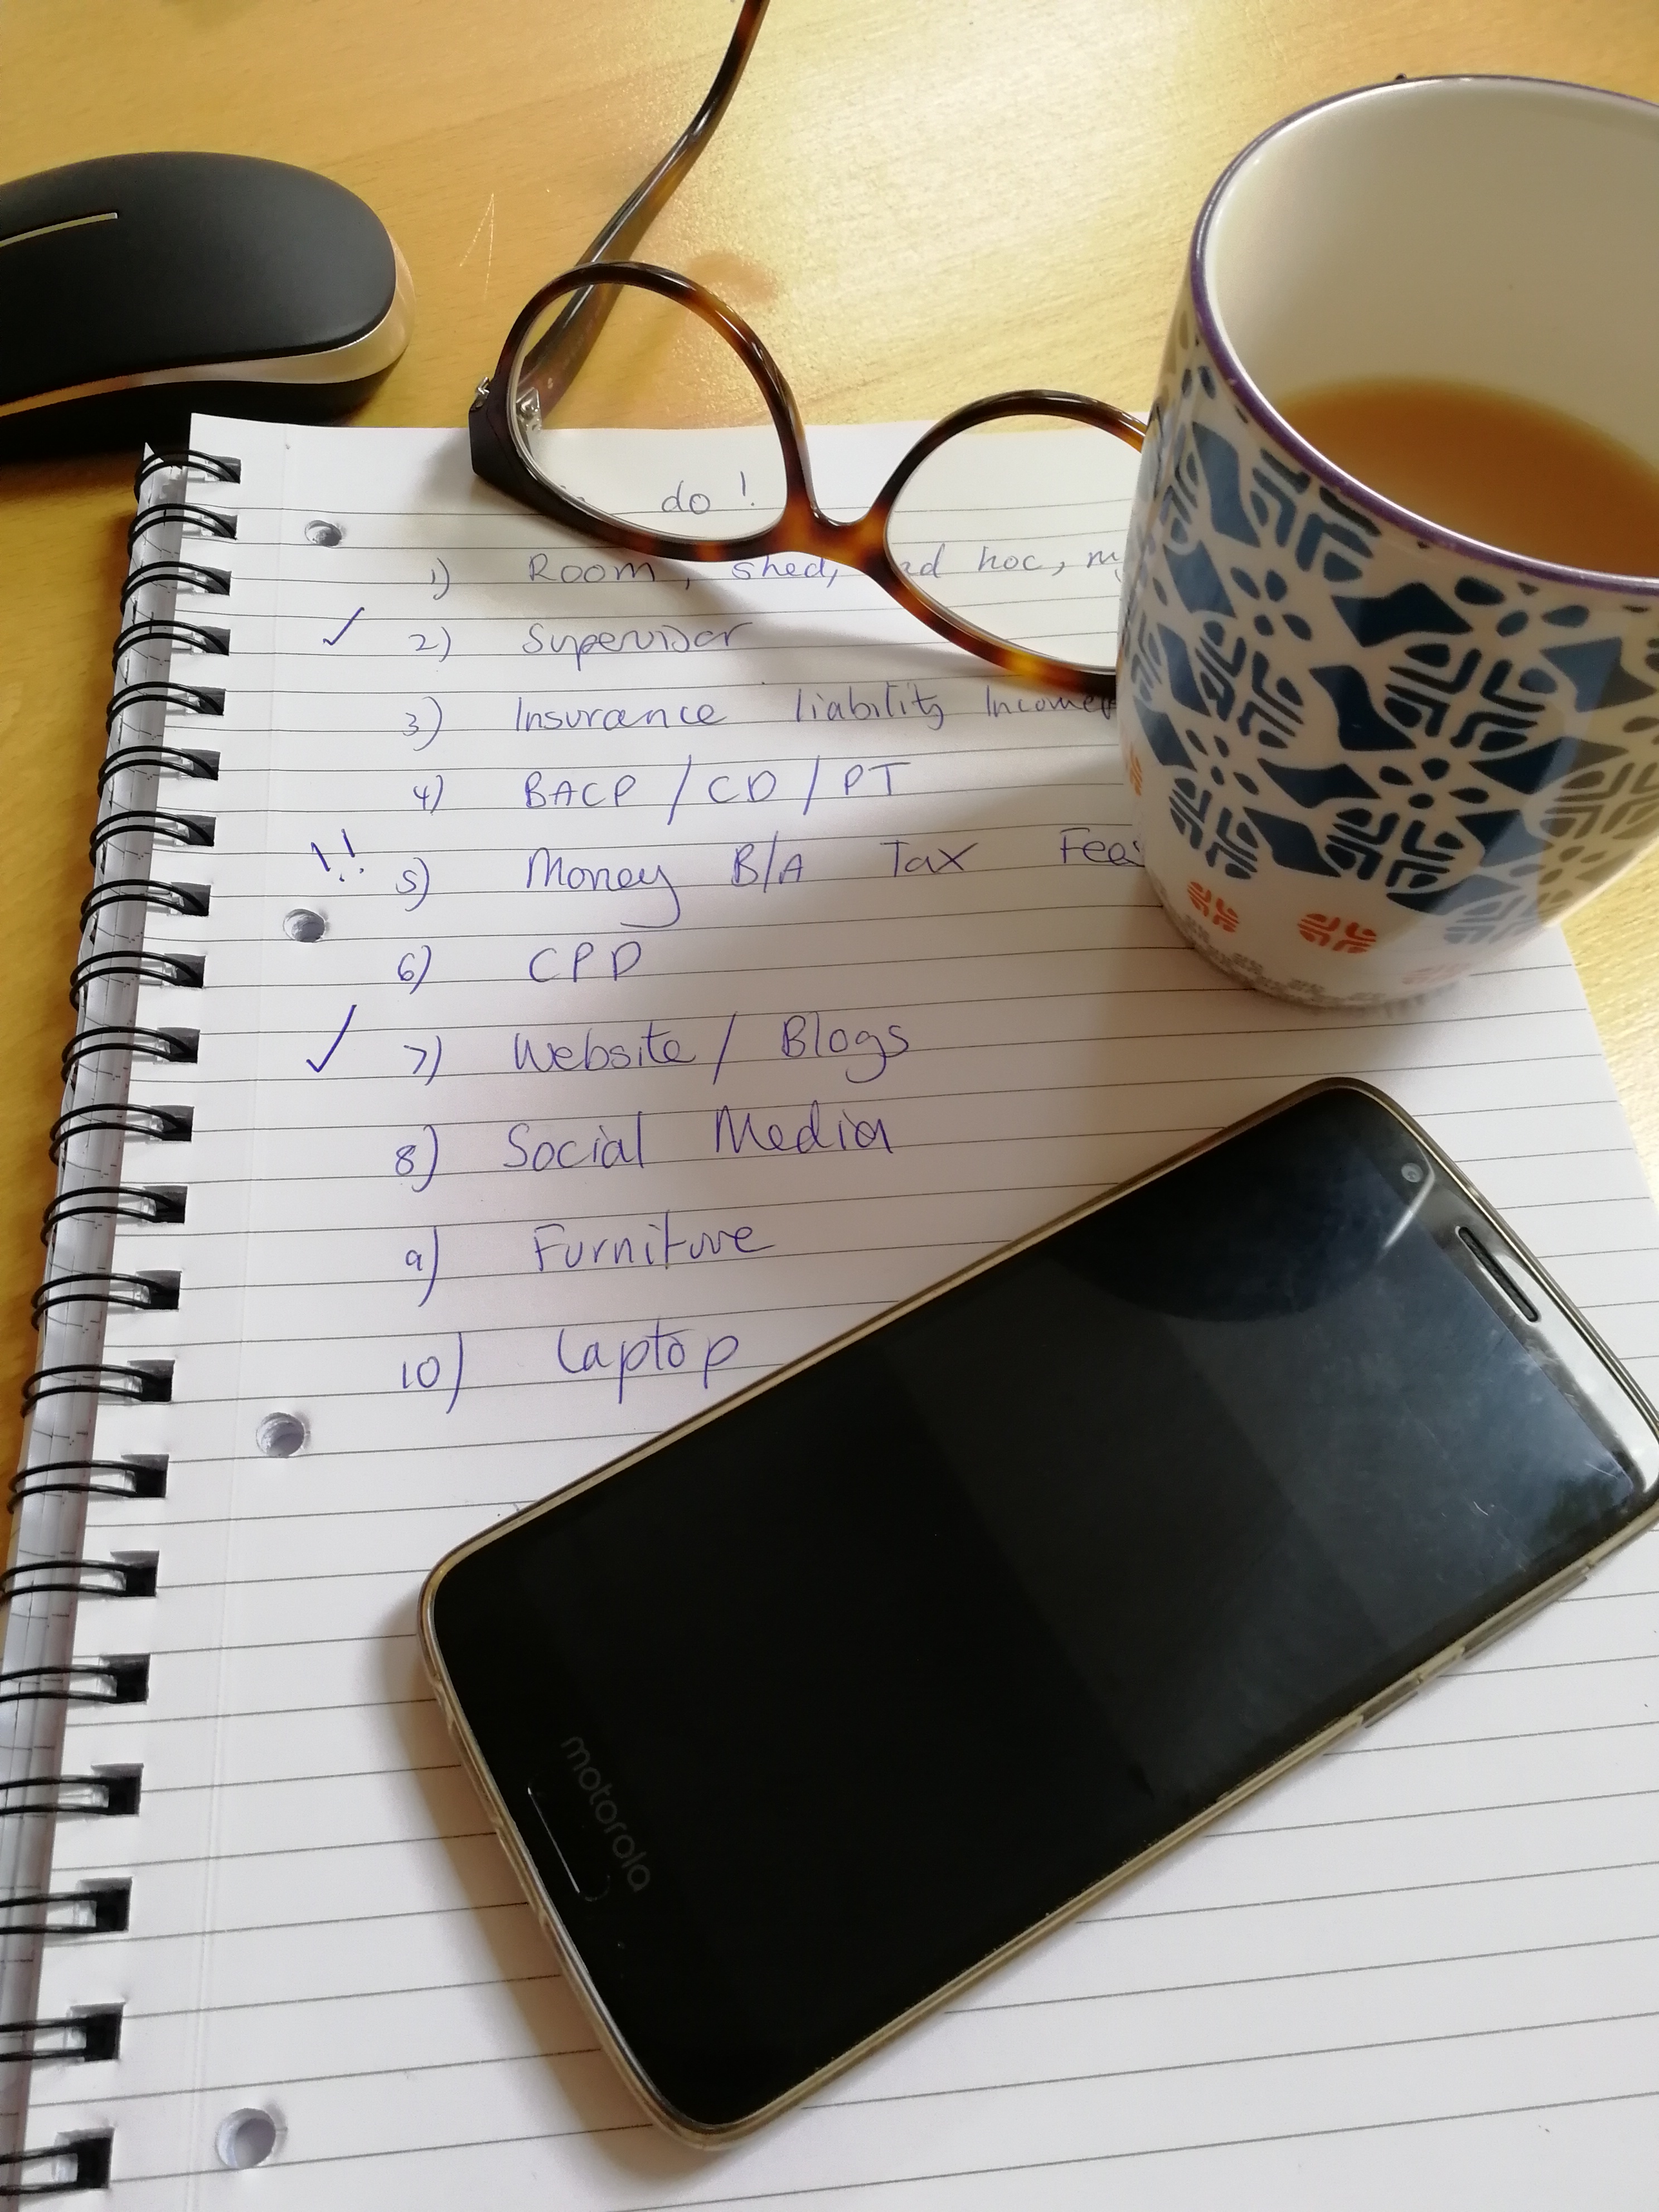 Desk with glasses, tea, phone and notebook